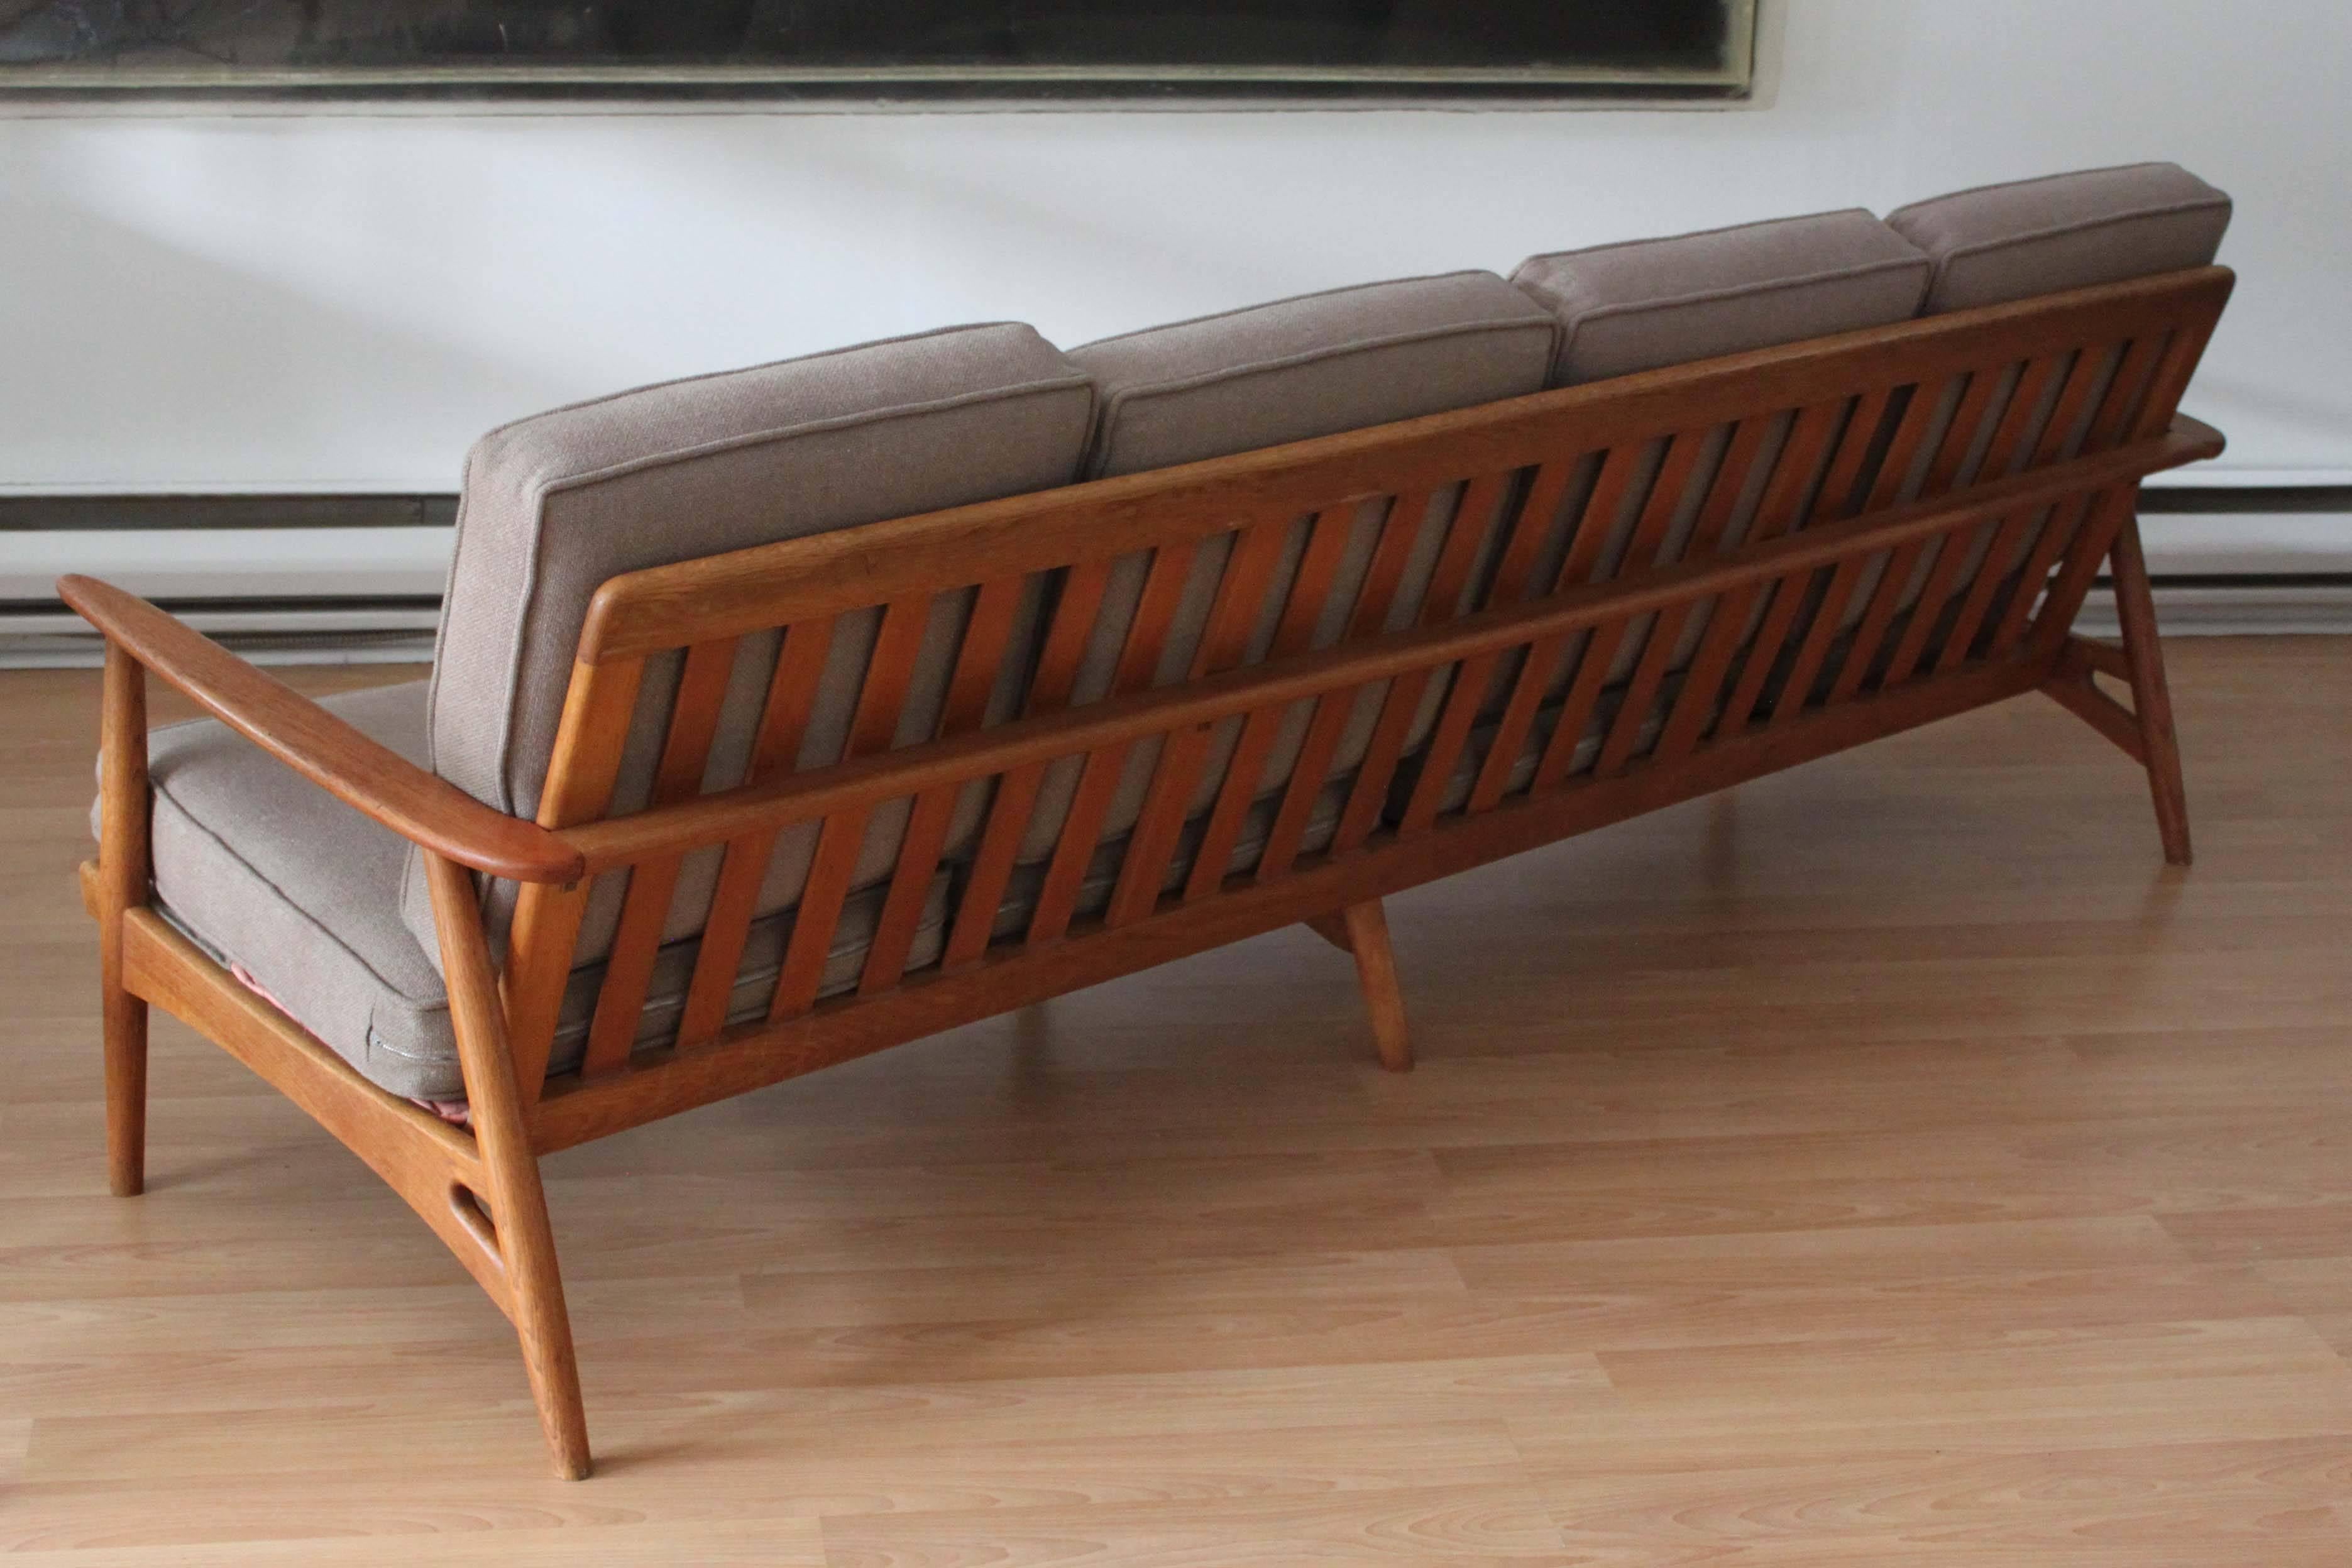 Danish modern teak four-seat sofa in the manner of Grete Jalk. New upholstery and cushions, frame in excellent vintage condition, very solid.